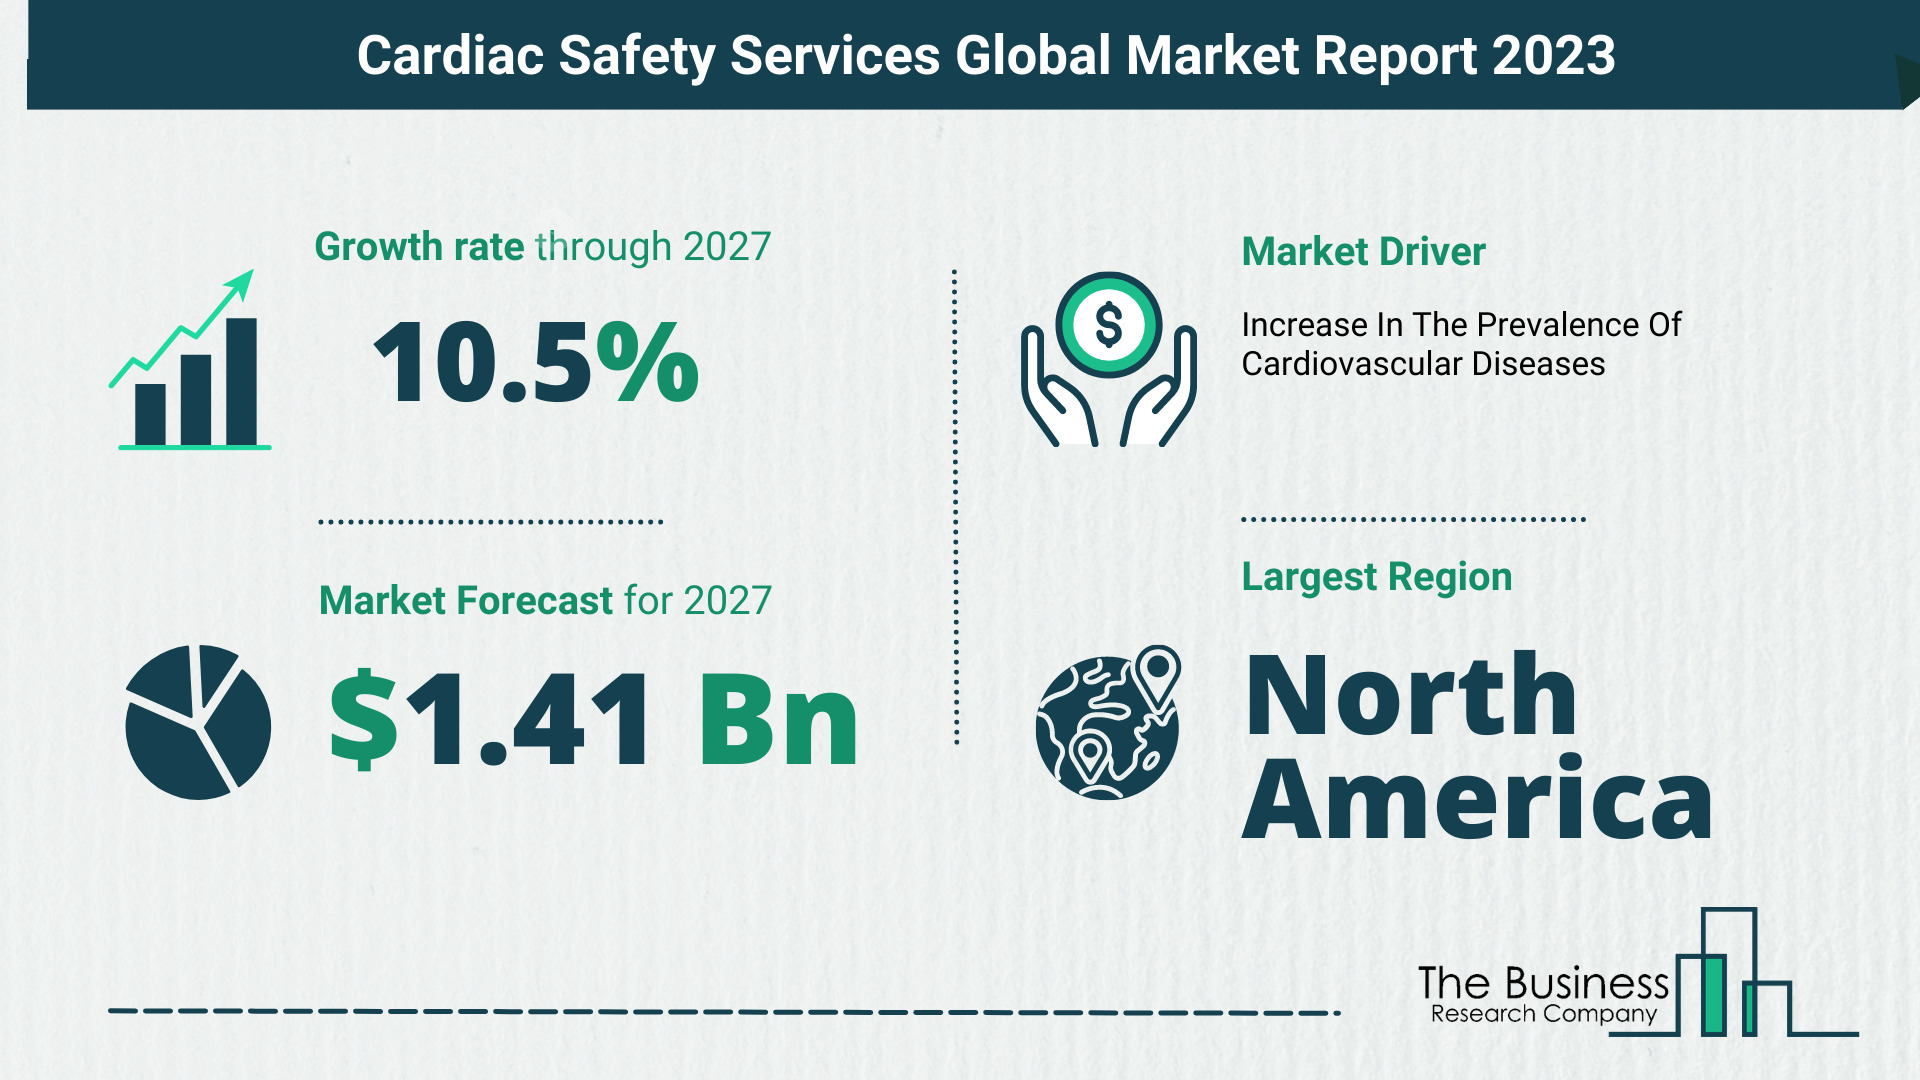 What Will The Cardiac Safety Services Market Look Like In 2023?